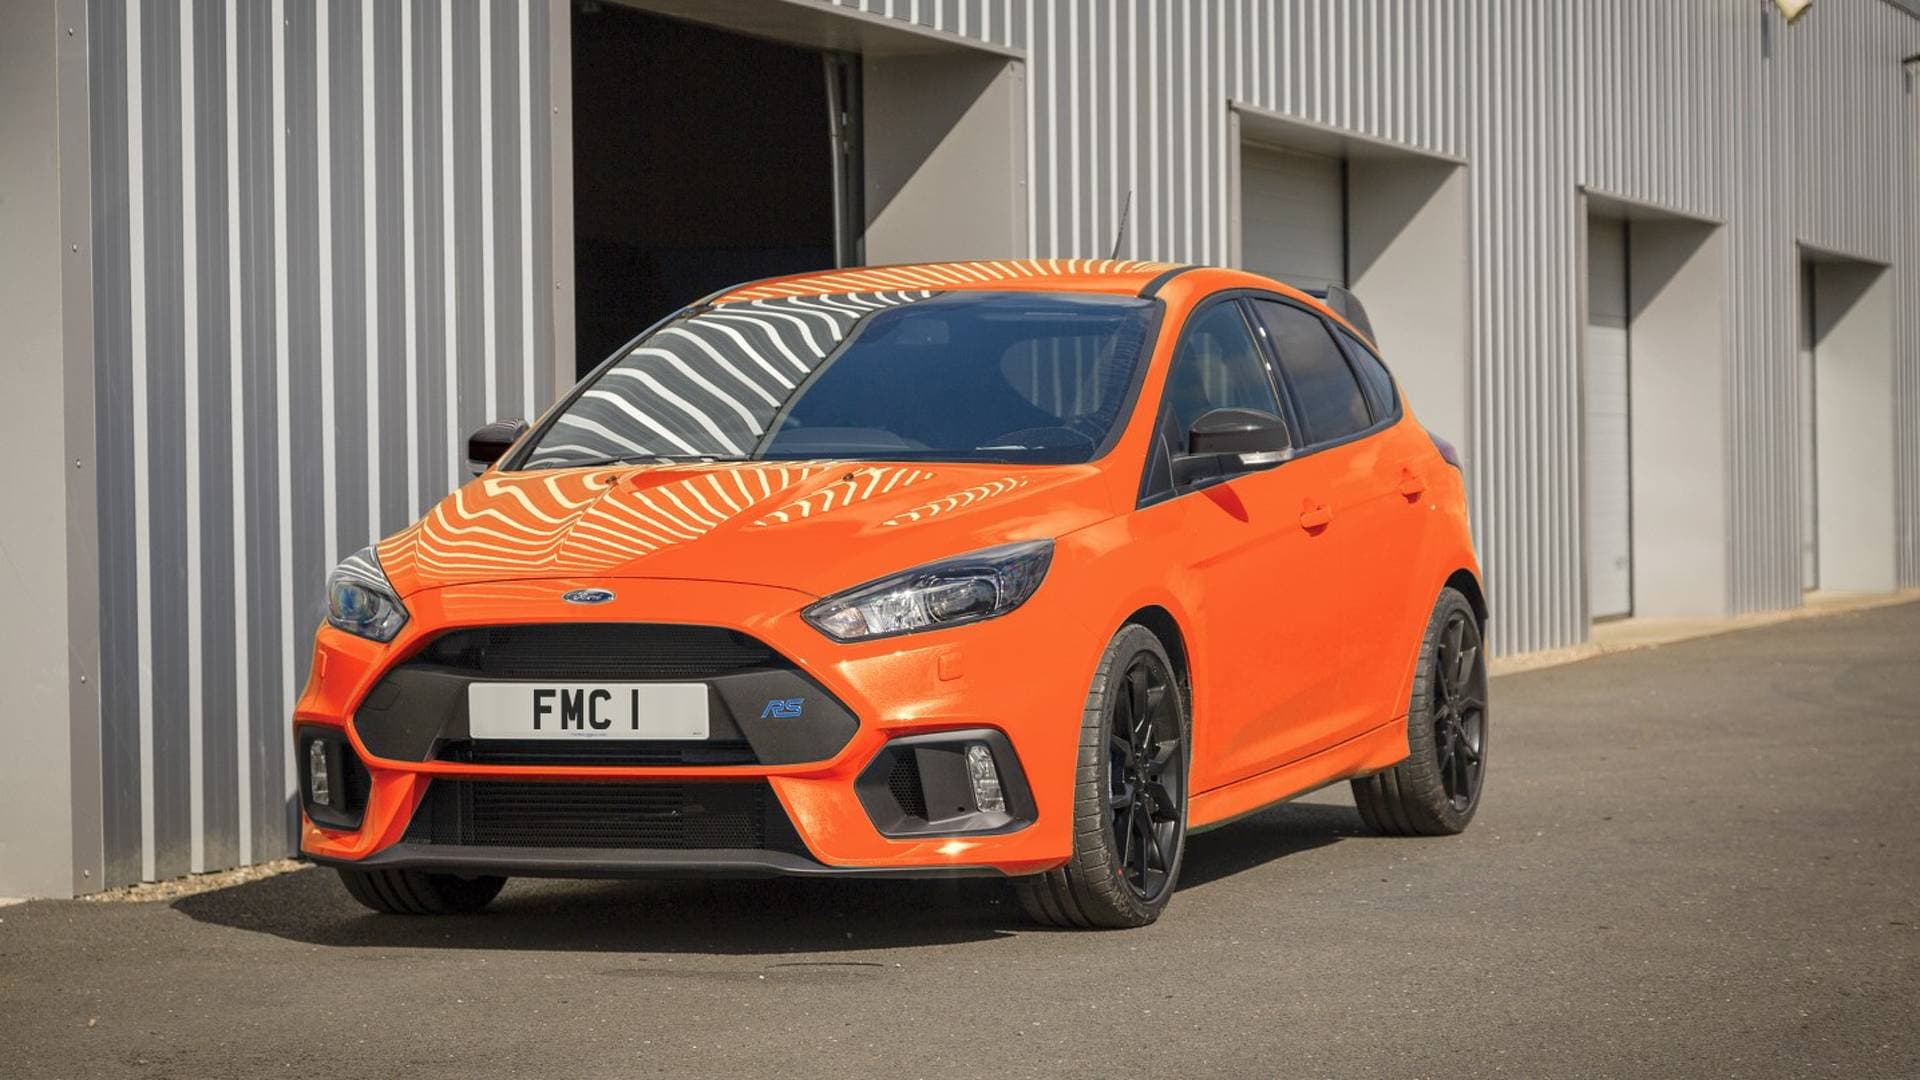 The Current Ford Focus RS Will Cease Production April 6, 2018